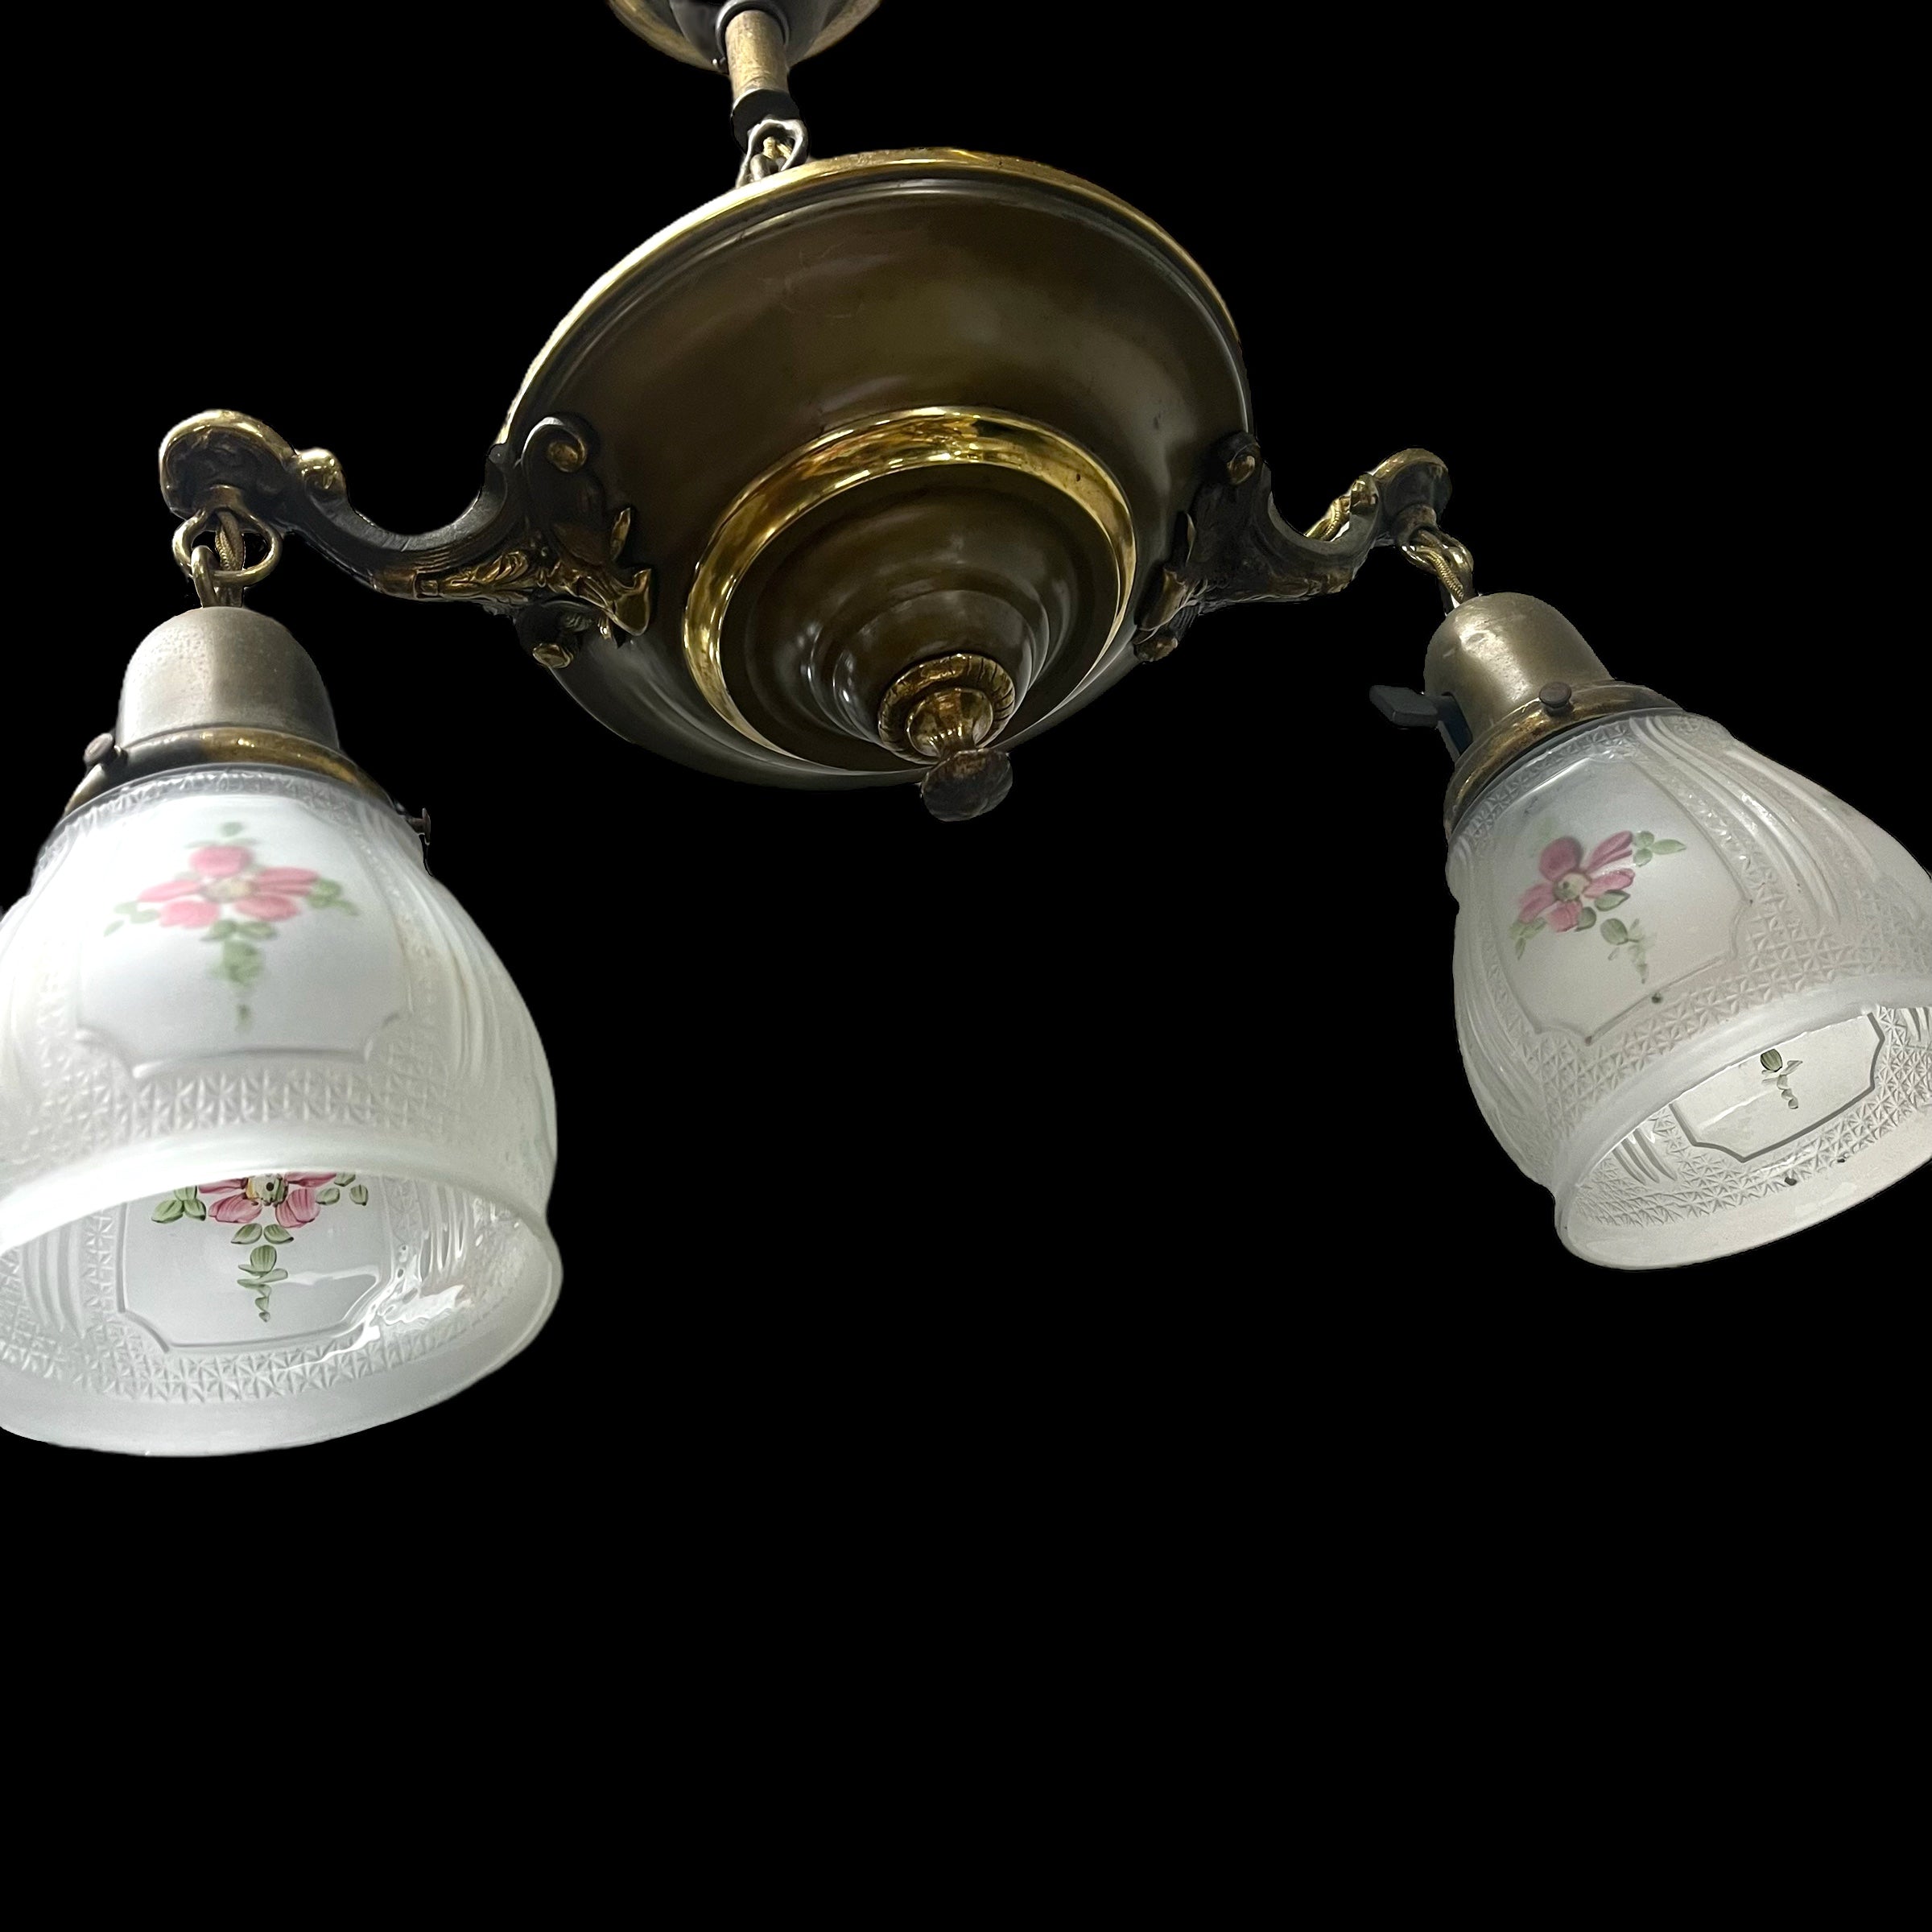 Antique Early 1900s Brass Double Pendant With Hand-Painted Frosted Glass Shades - Rewired